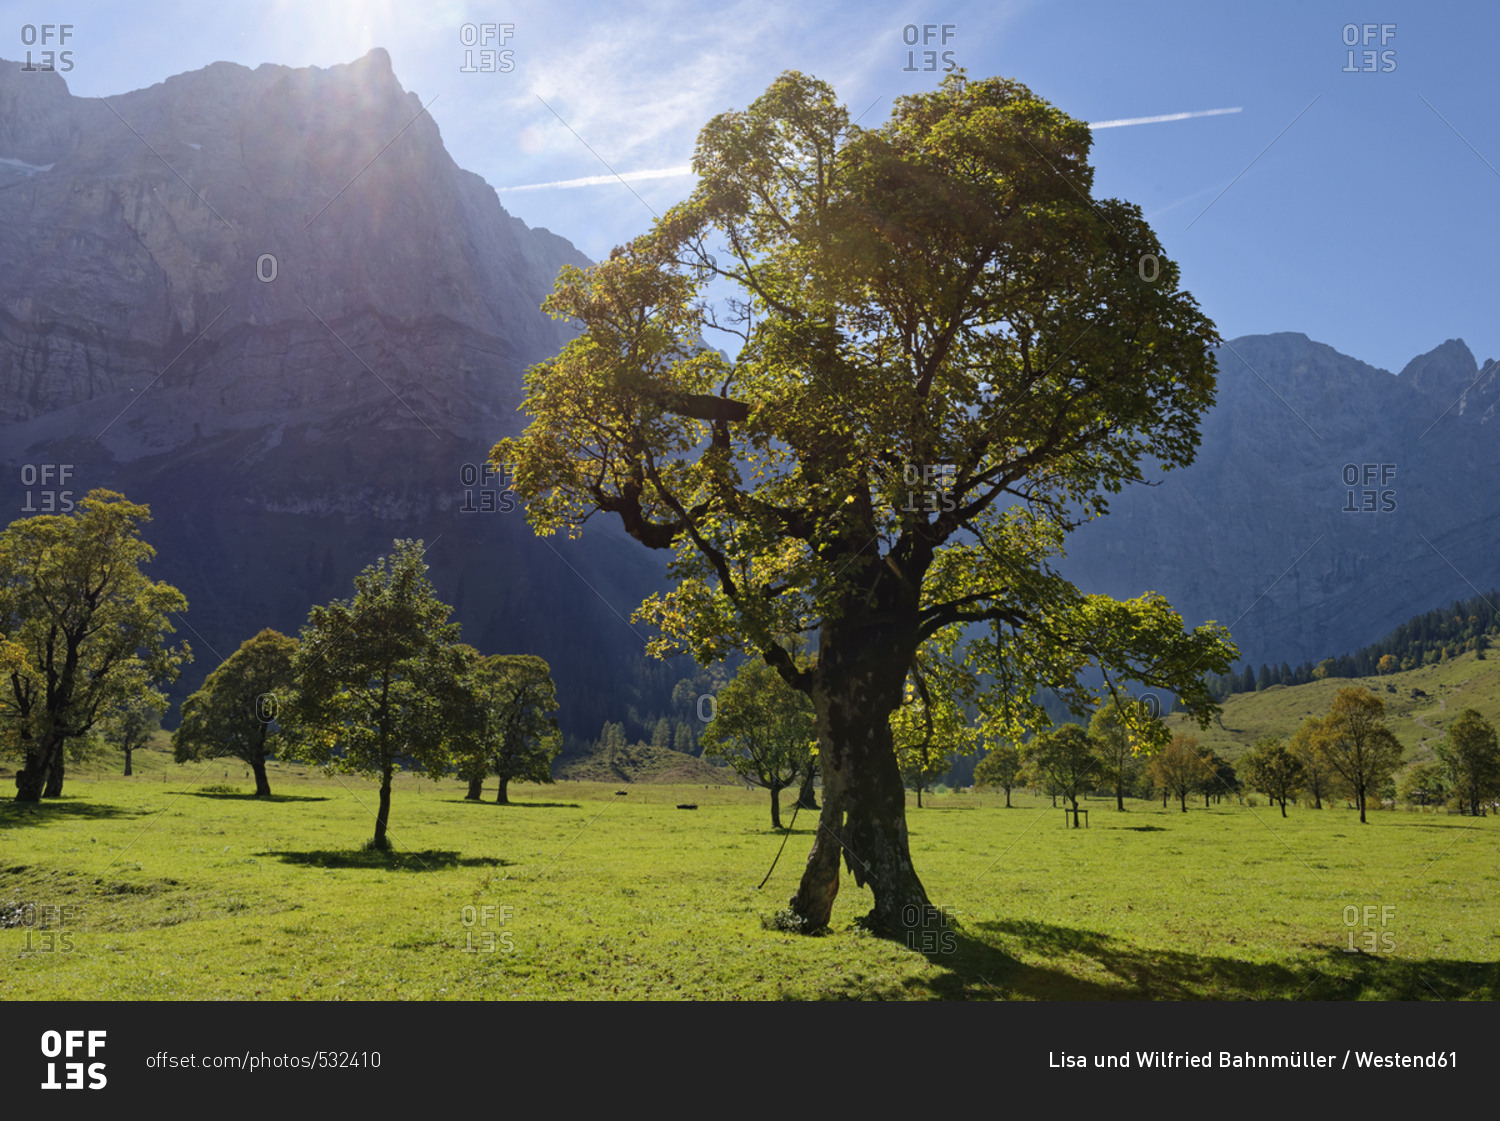 Austria- Tyrol- trees in front of Karwendel Mountains in autumn